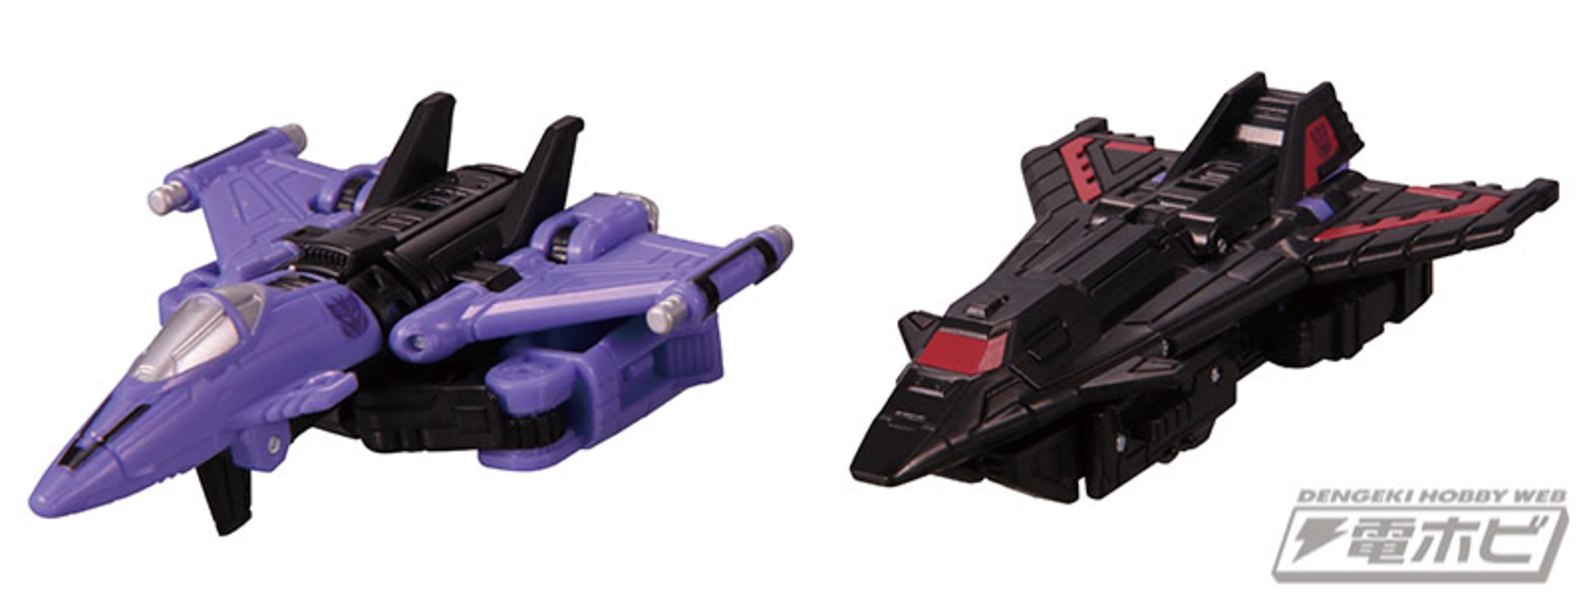 Transformers Siege Shockwave's Alternate Super Mode And More In New TakaraTomy Stock Photos 14 (14 of 39)